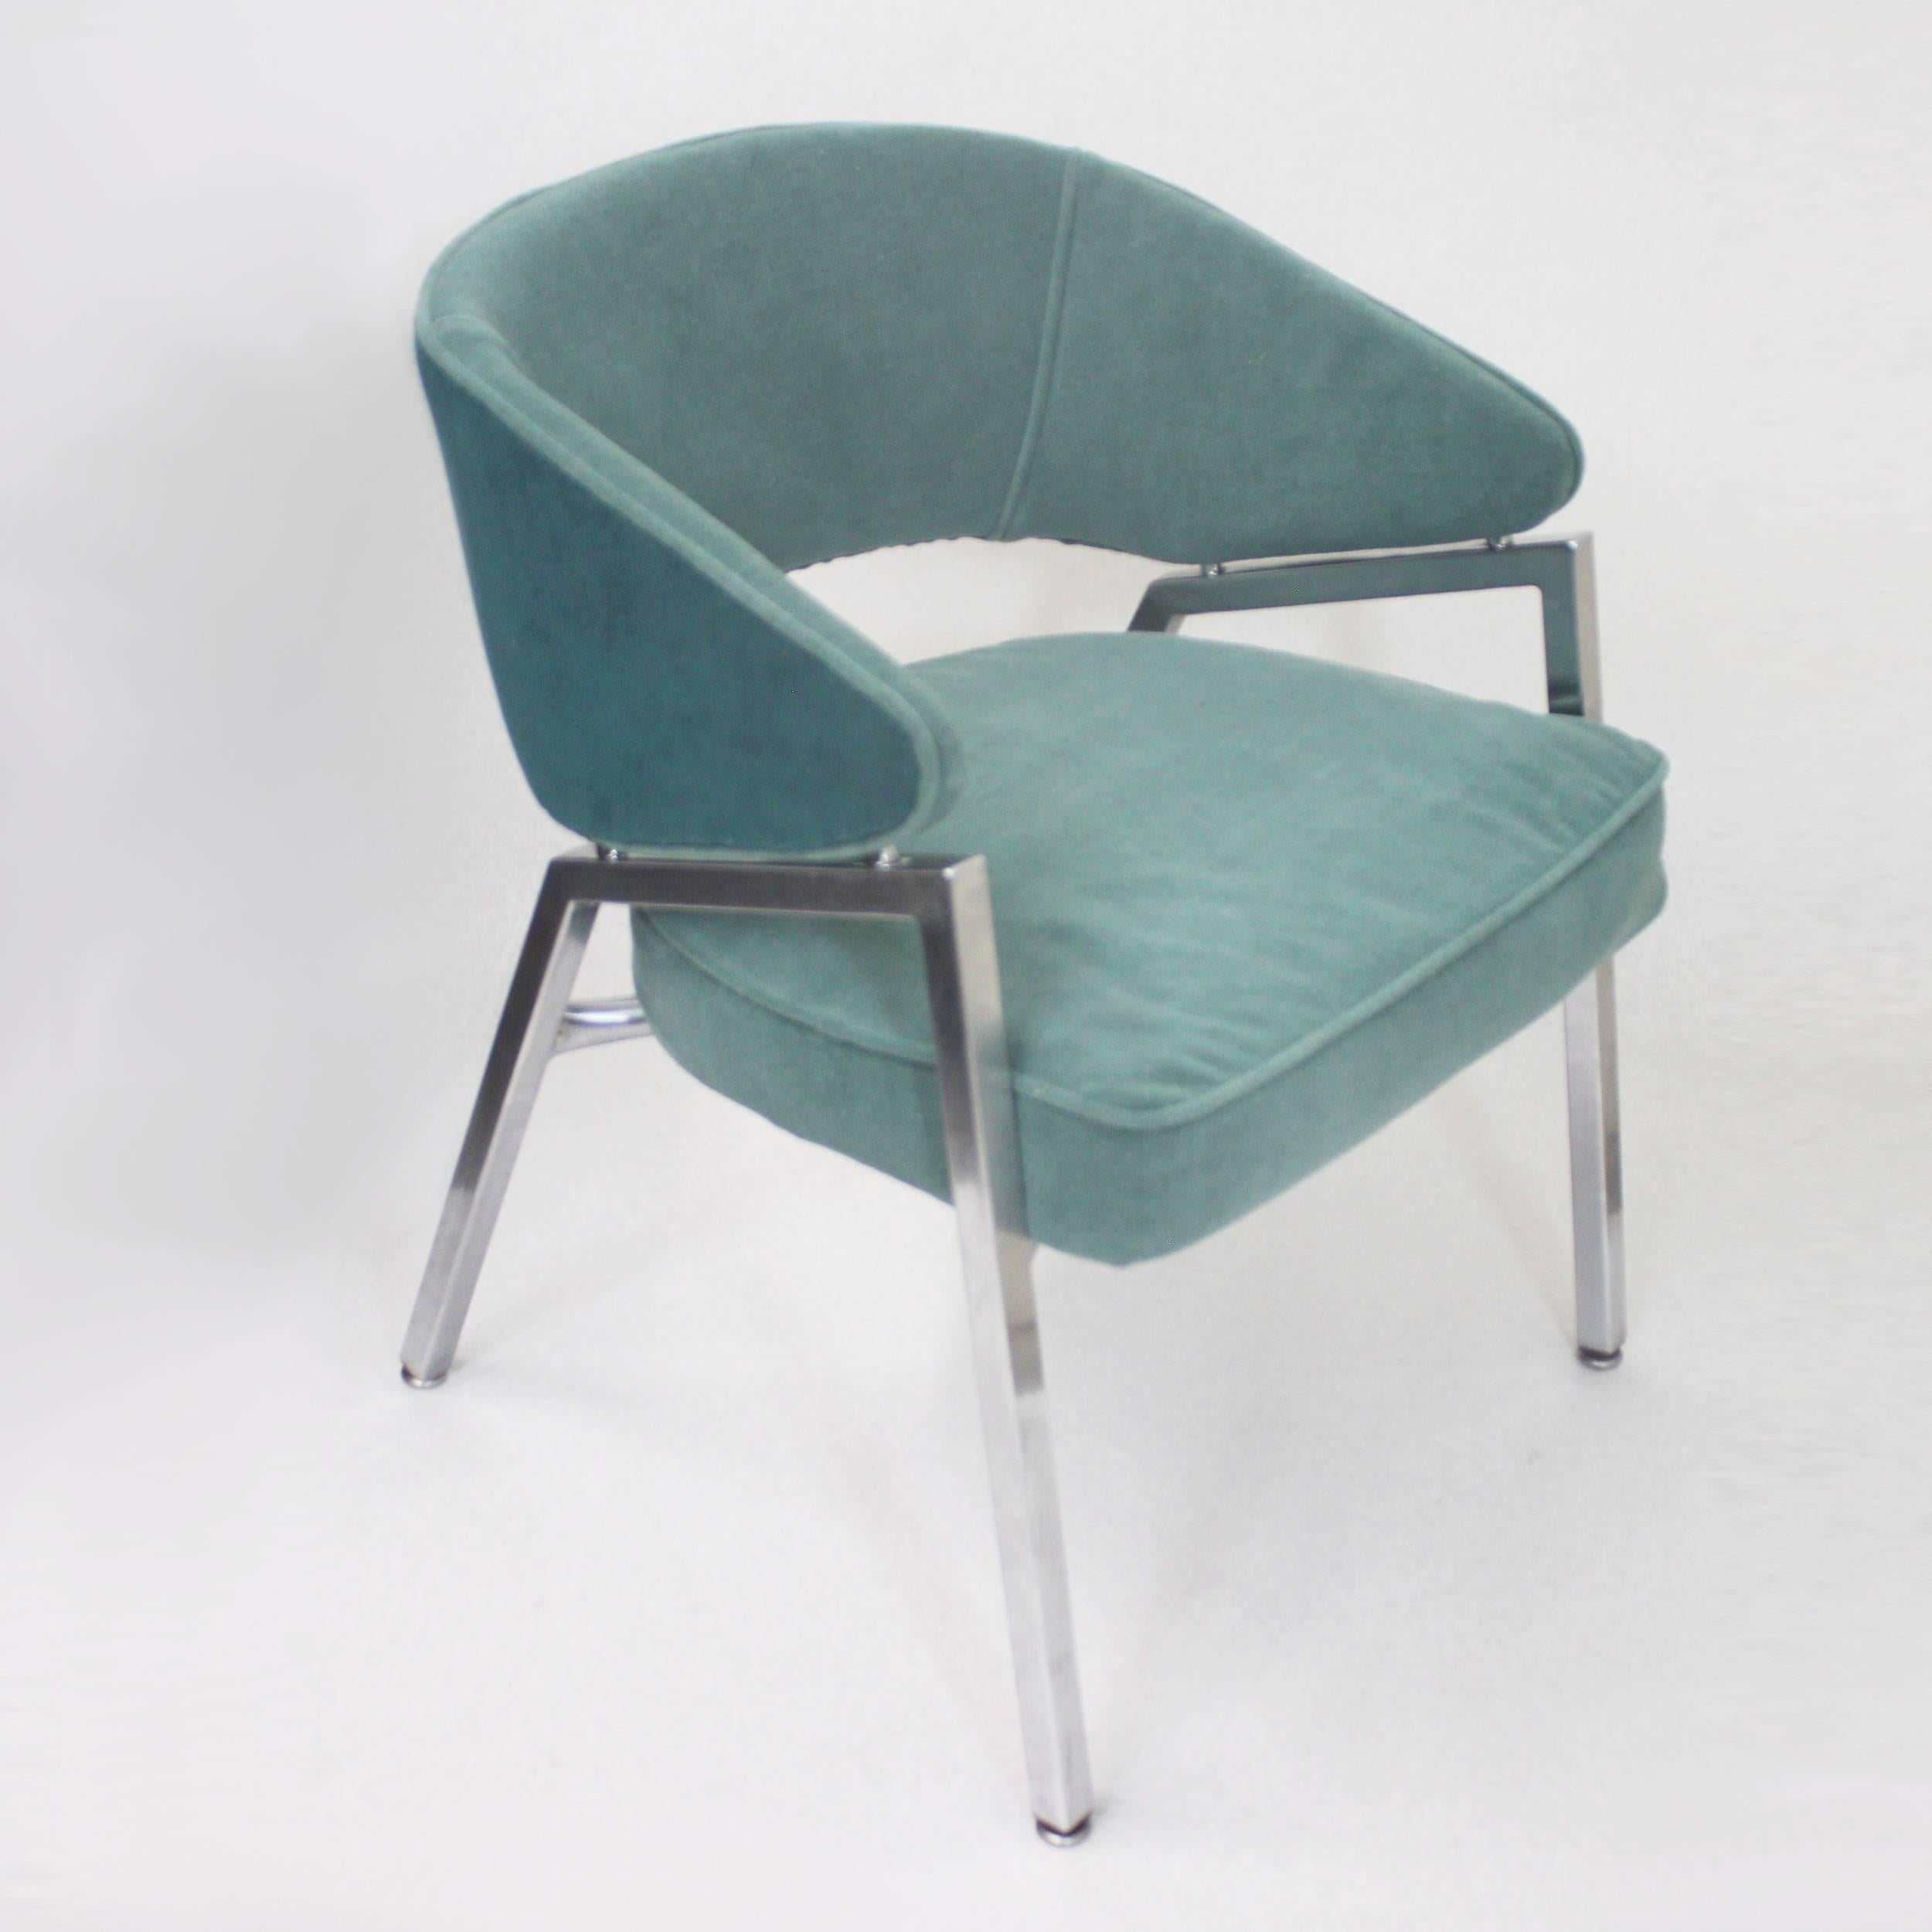 Rare Pair of 1970s Mid-Century Modern Teal Green and Chrome Side Arm Chairs 1